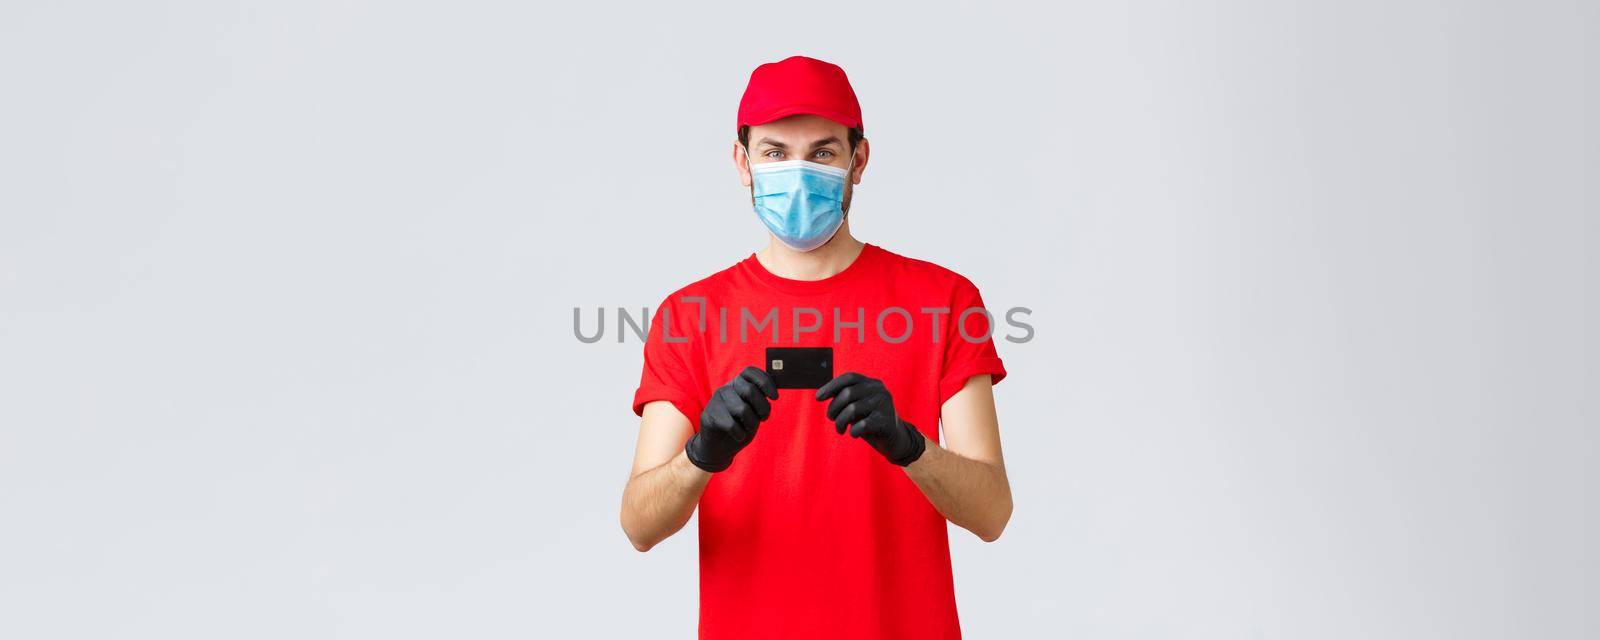 Contactless delivery, payment and online shopping during covid-19, self-quarantine. Cheerful courier in red uniform cap and t-shirt, wear medical face mask, gloves showing credit card, order food.